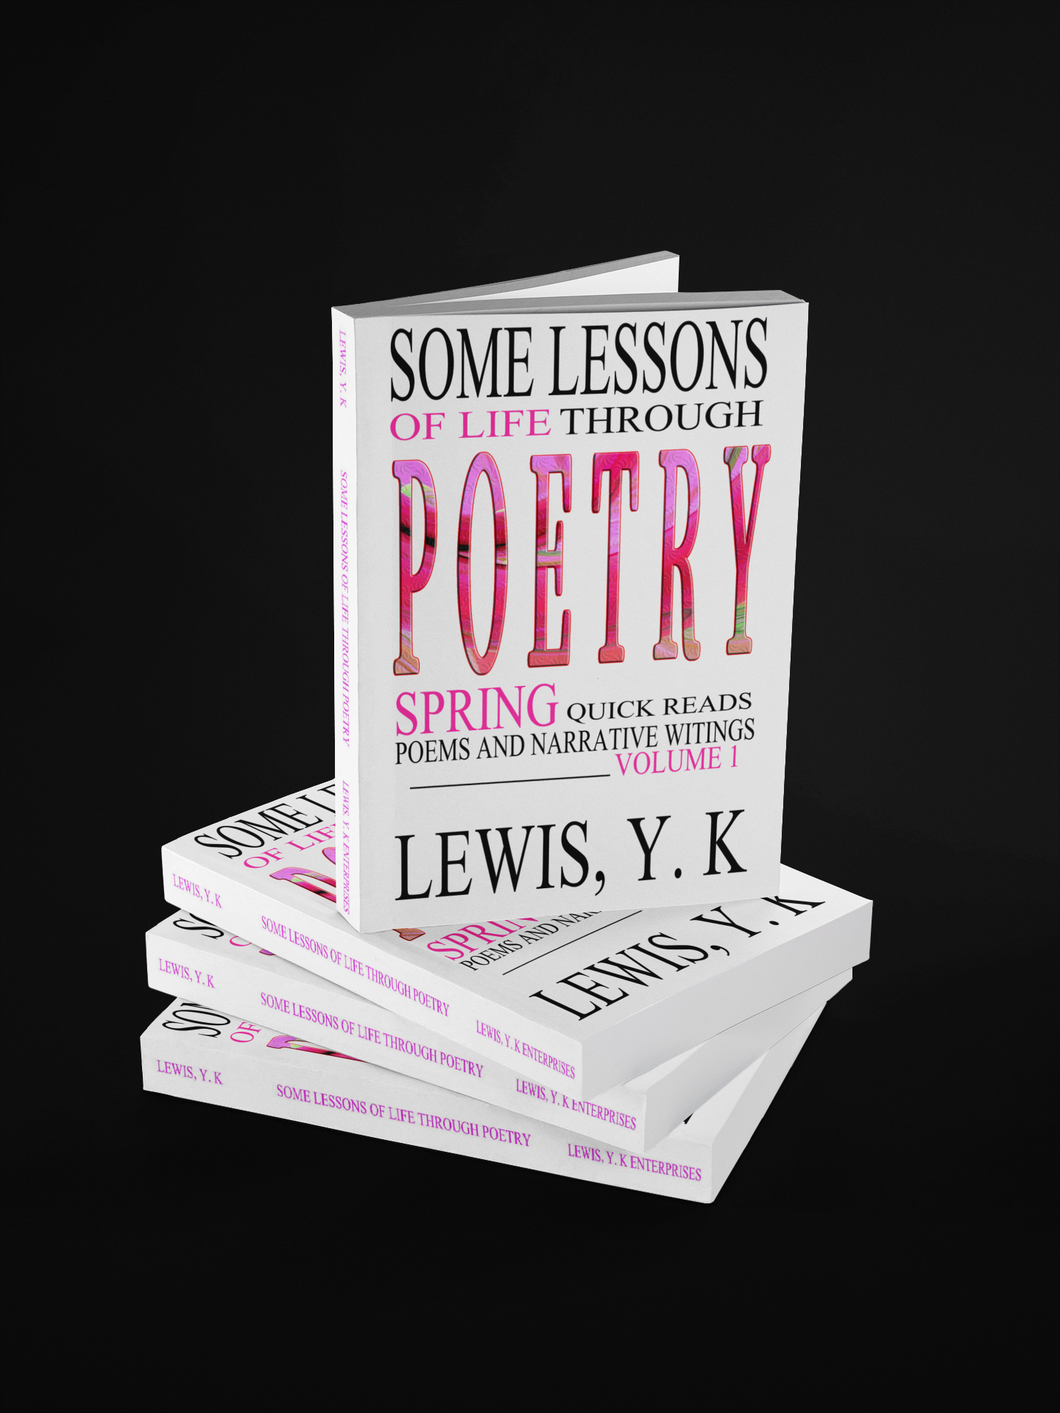 Some Lessons of Life Through Poetry | Spring Volume 1 Paperback ISBN: 978-1-950986-31-6